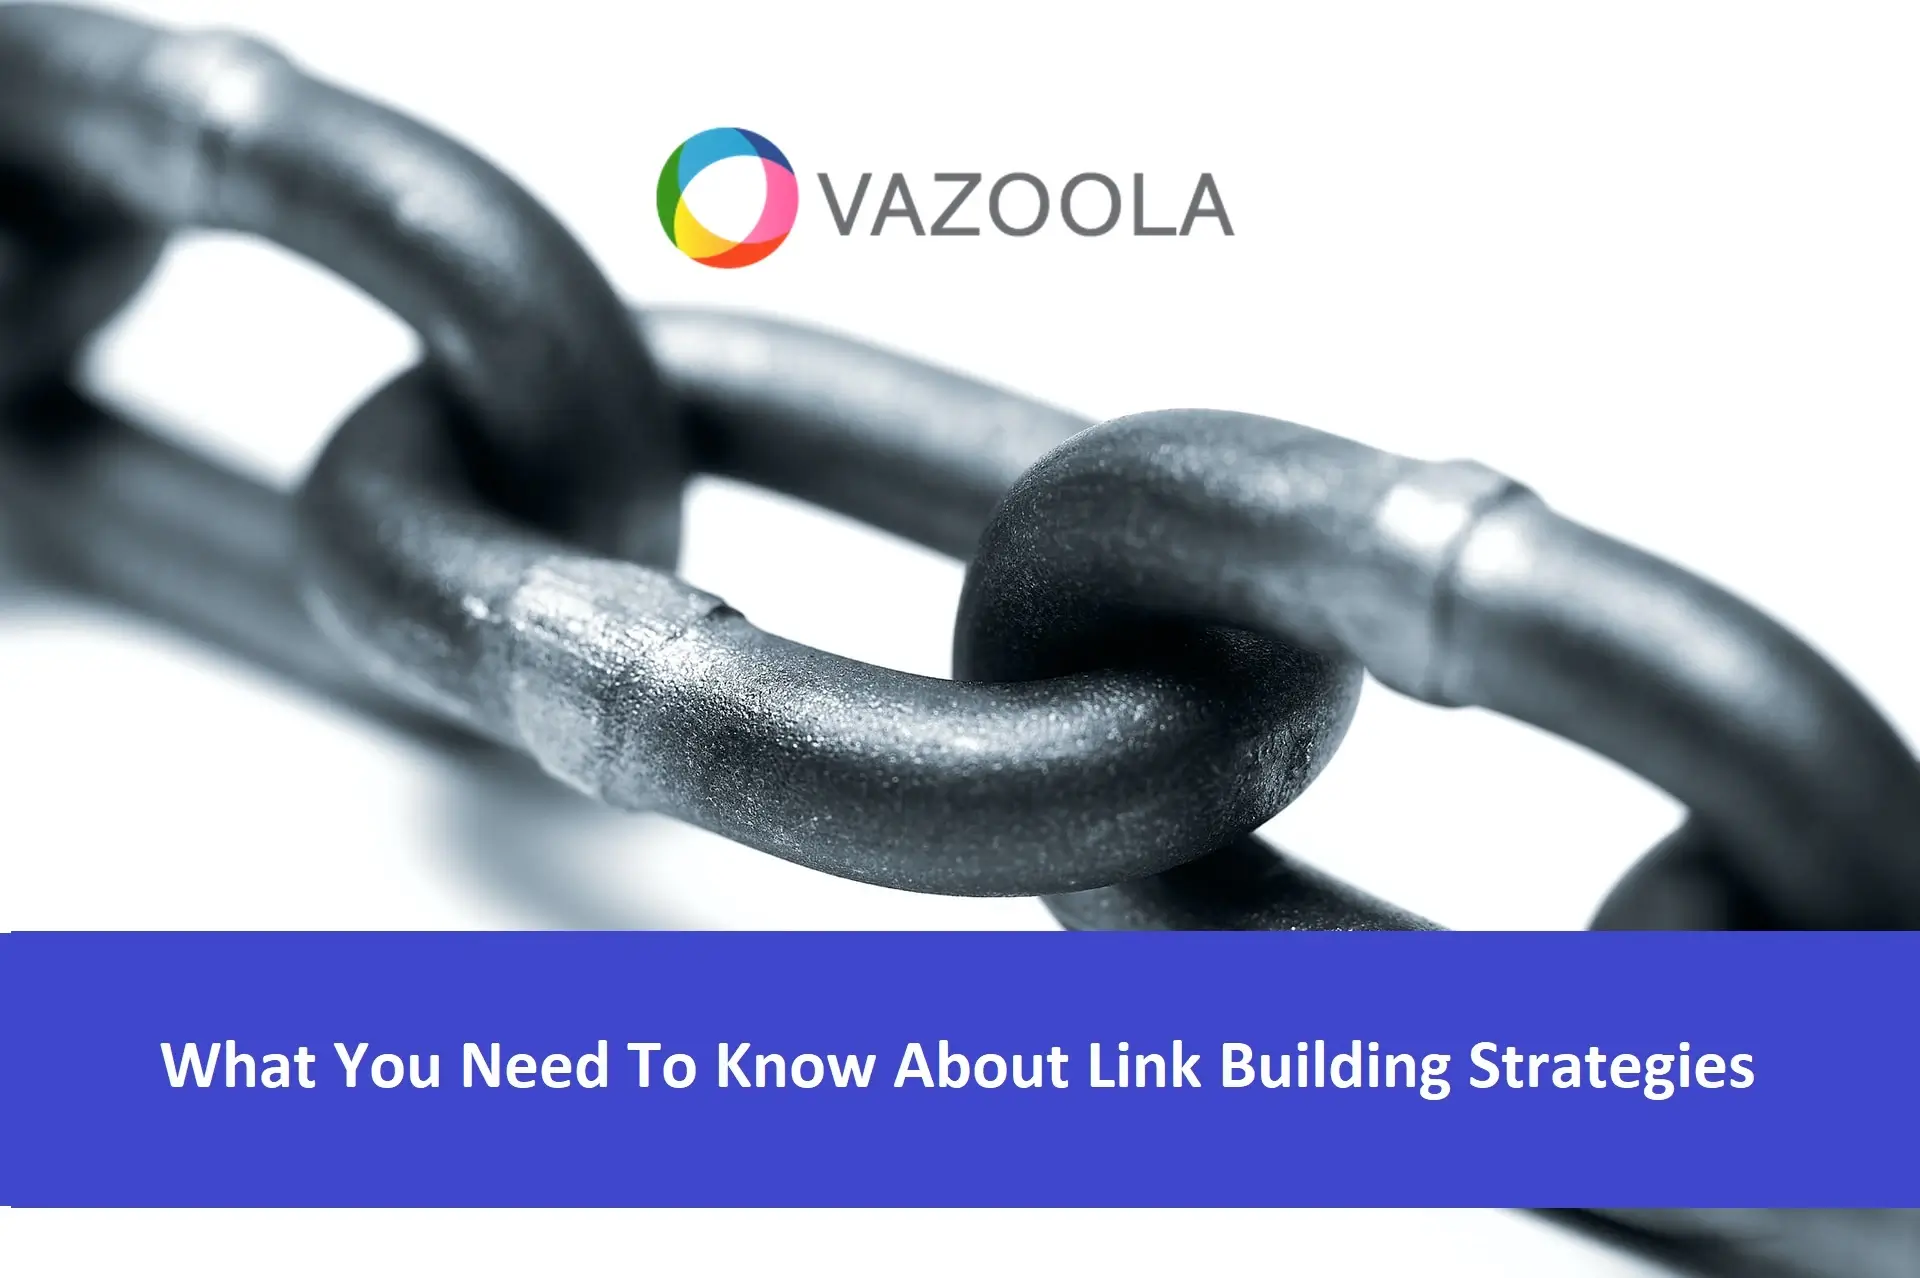 What You Need To Know About Link Building Strategies